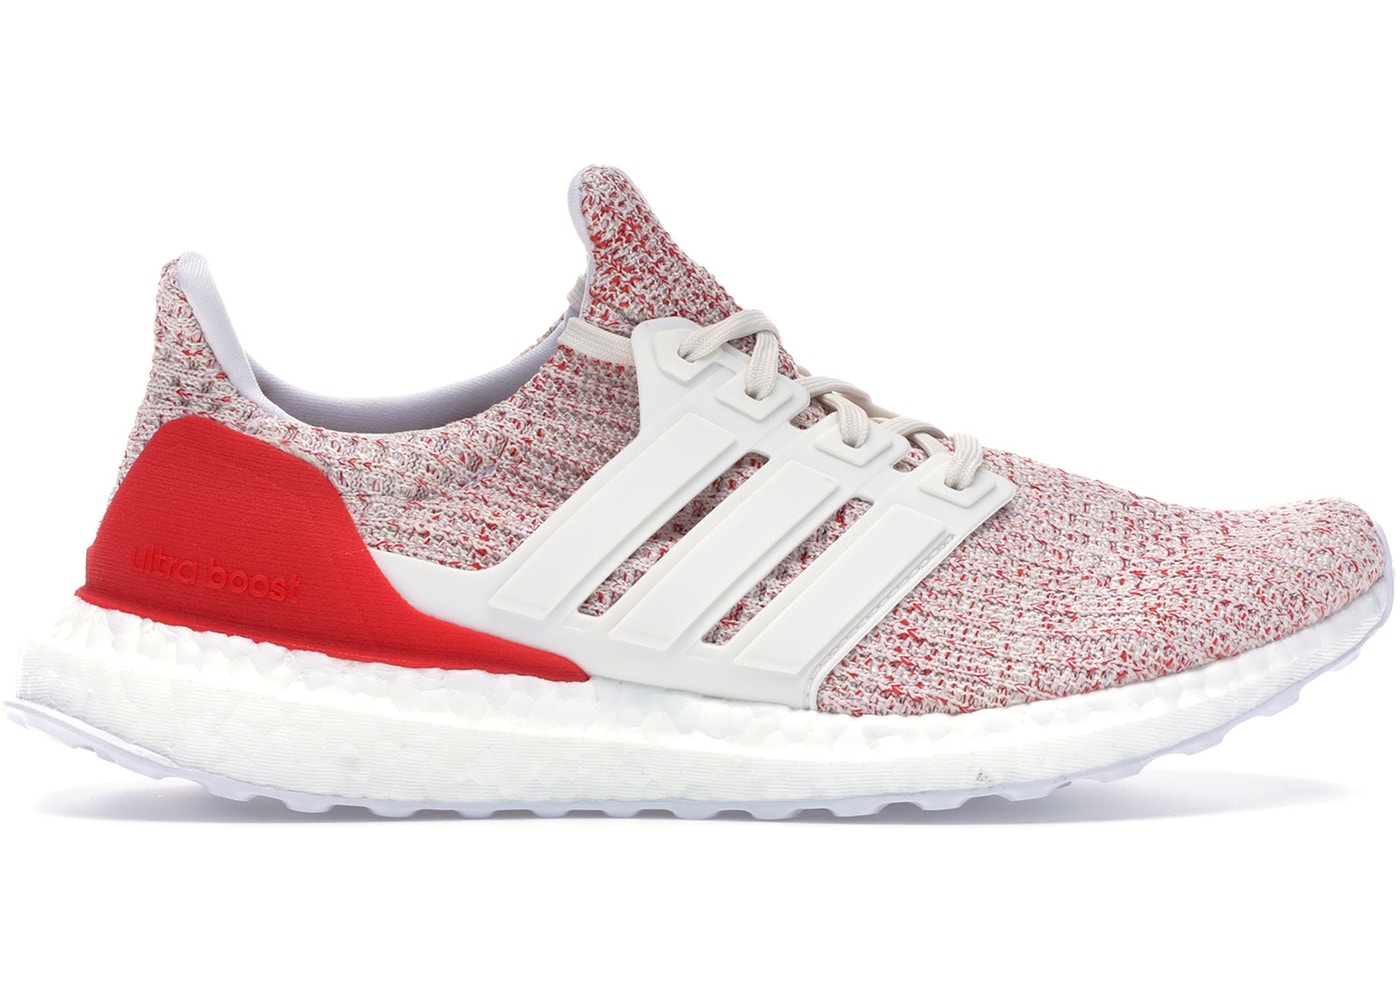 adidas ultra boost white and red